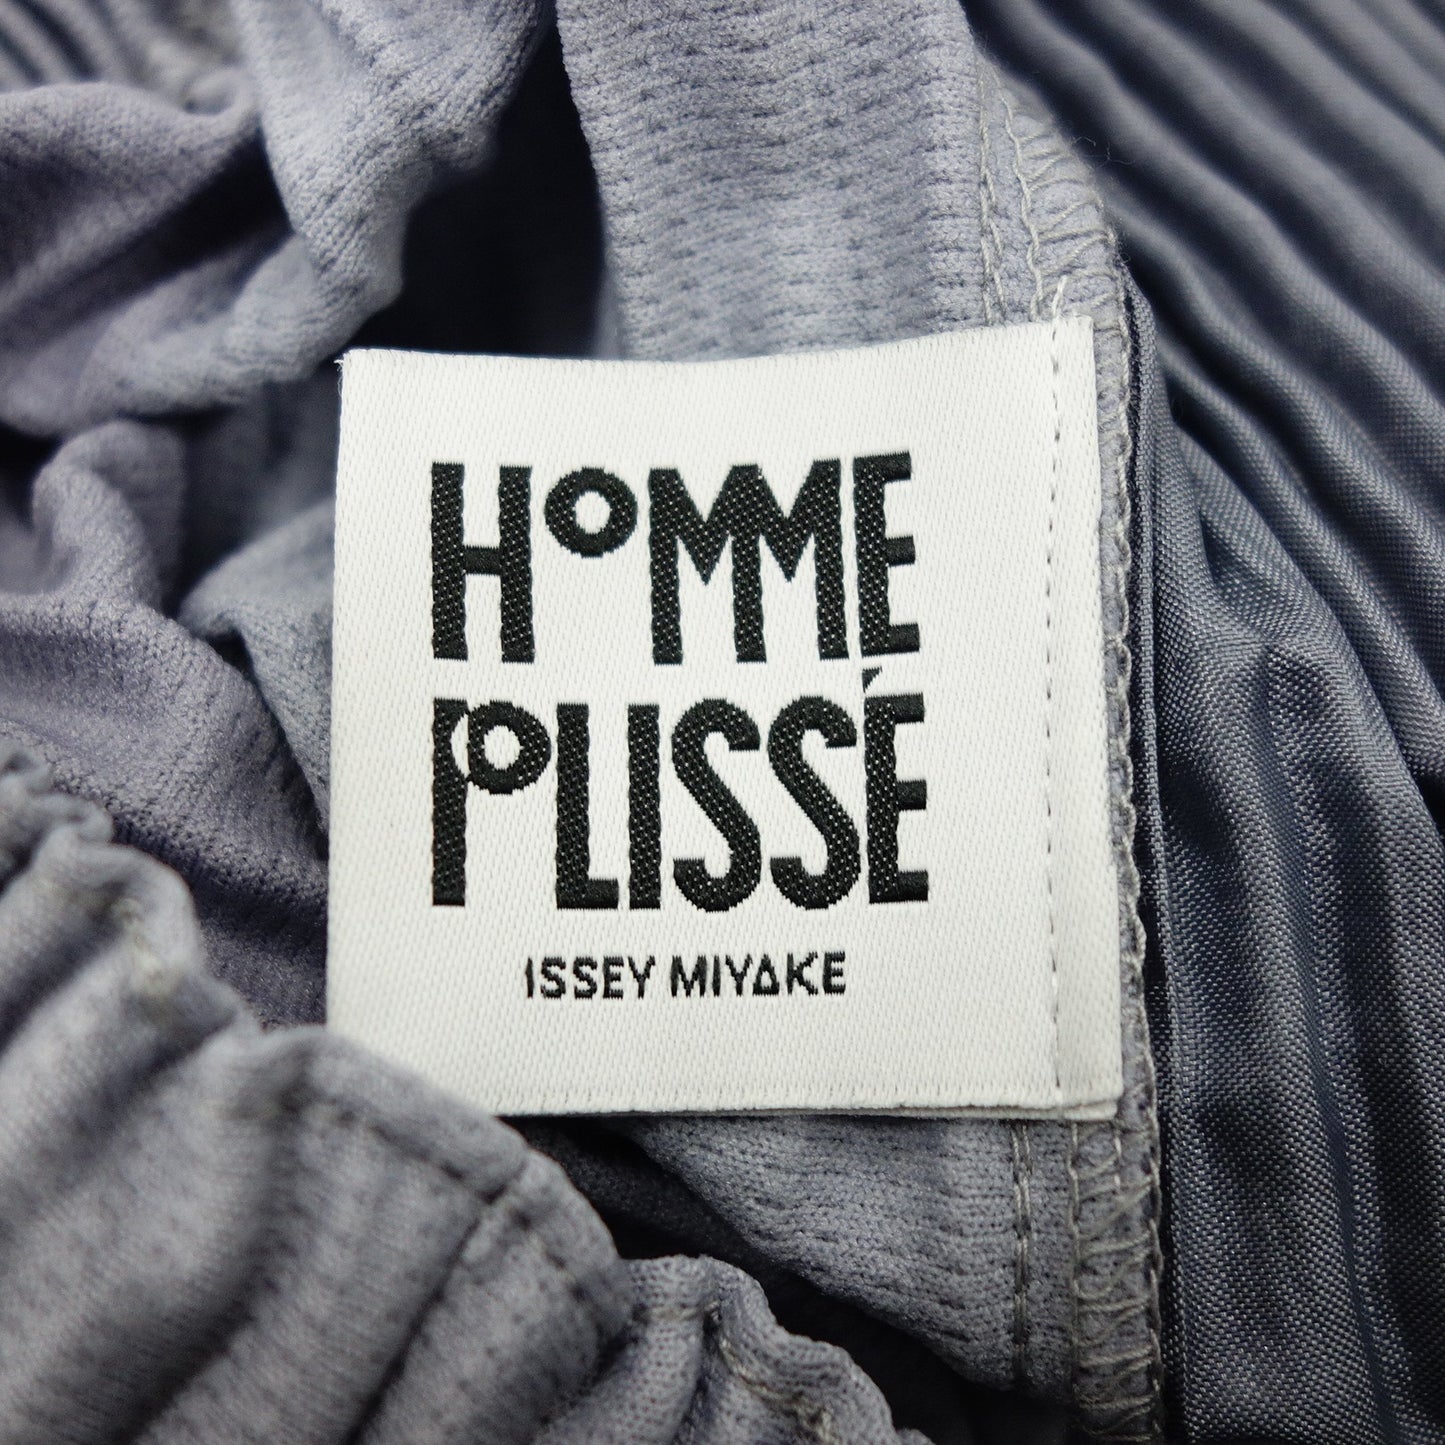 Good Condition◆Issey Miyake Homme Plisse Short Pants Pleated HP91JF126 Men's Size 3 Gray ISSEY MIYAKE HOMME PLISSE [AFB30] 